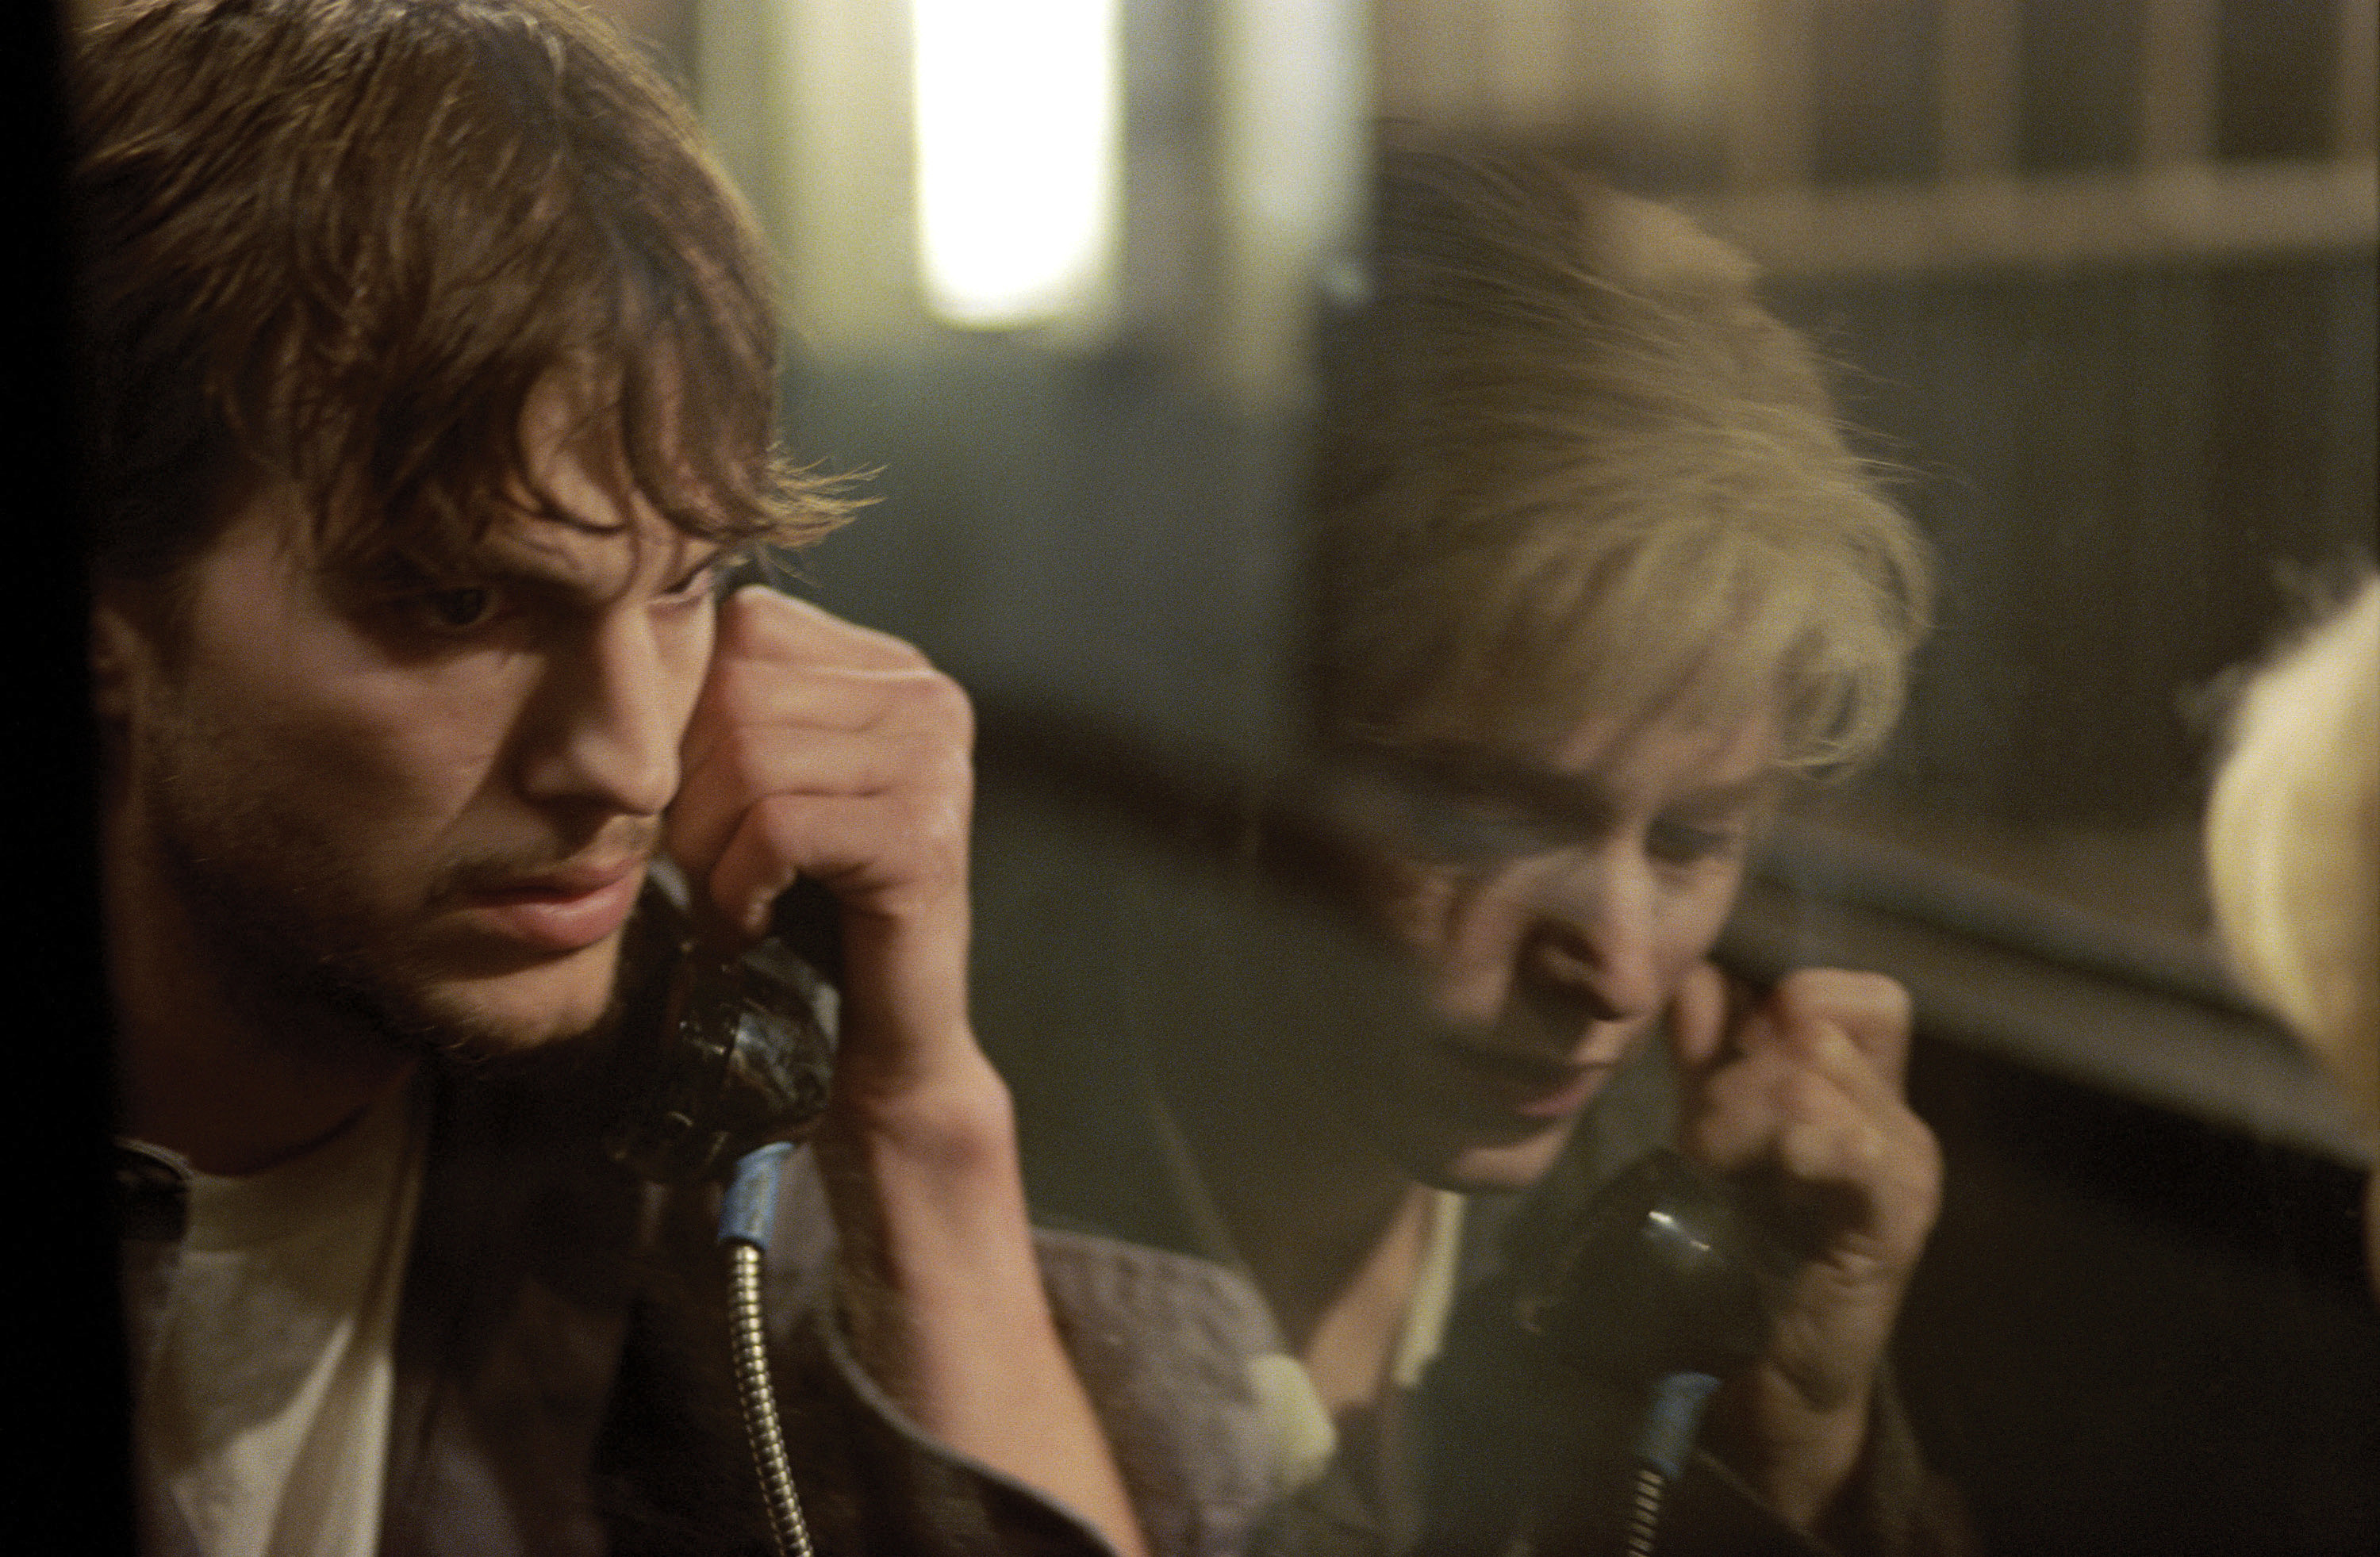 Ashton Kutcher as Evan, talking on a phone with a woman reflected in the glass next to him